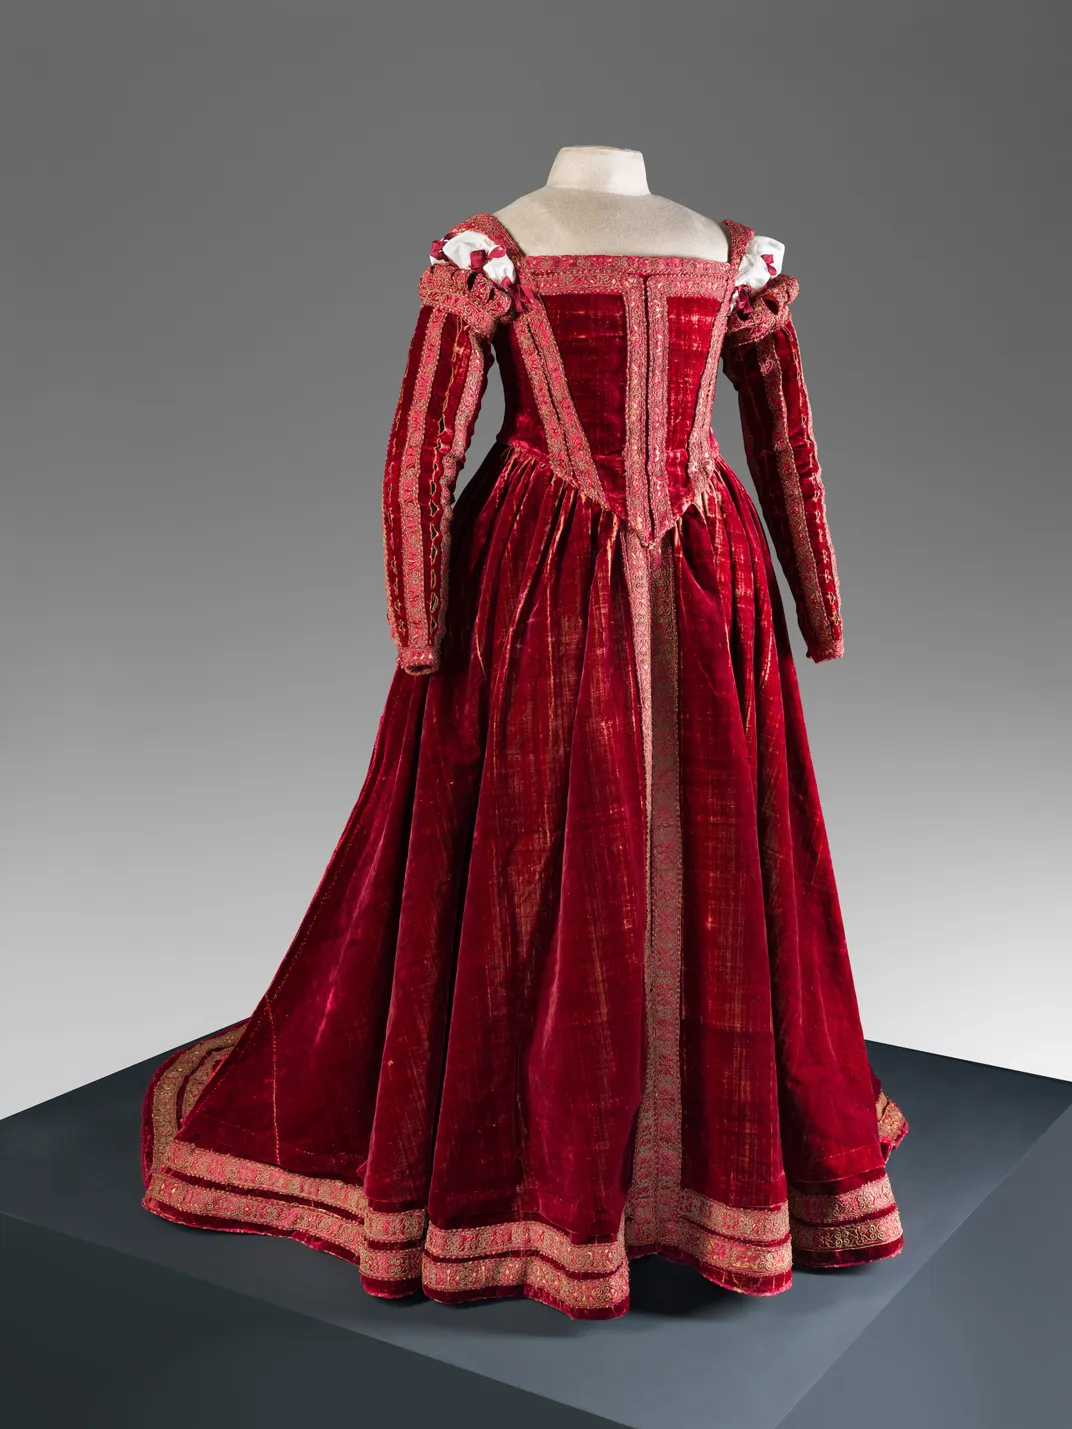 Petticoat with sleeves, ca. 1560, likely owned by Eleonora of Toledo